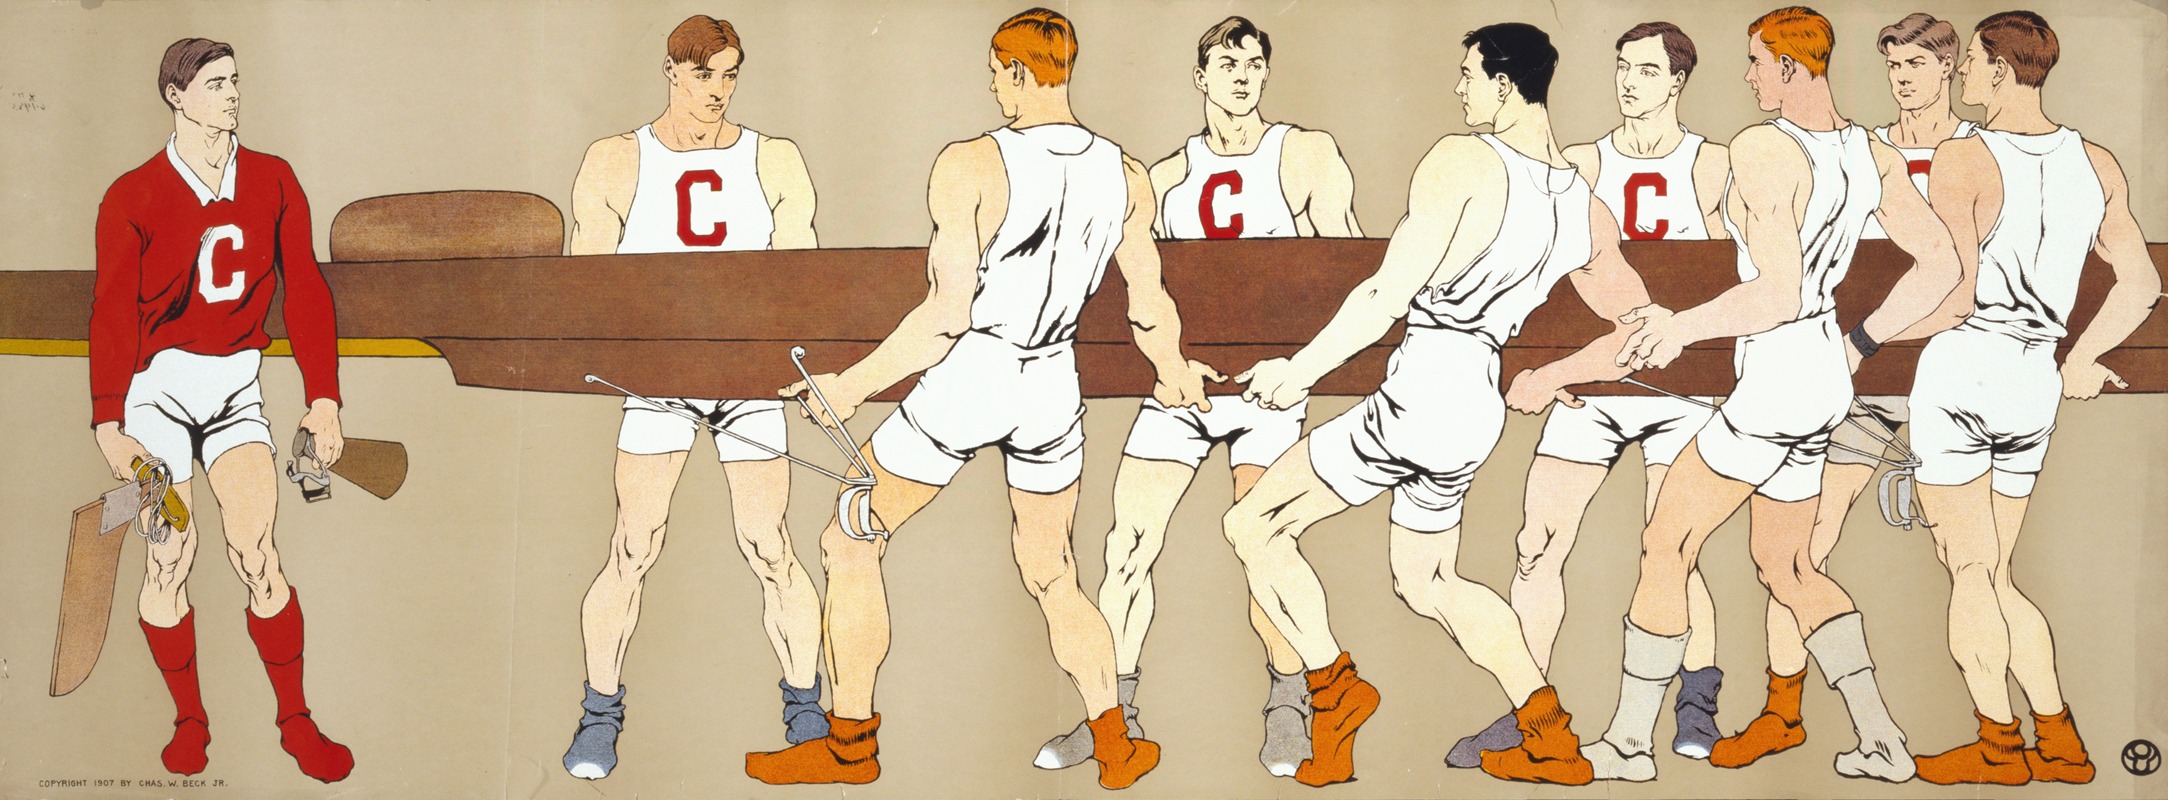 Edward Penfield - Cornell crew team holding a boat; on left is team coxswain